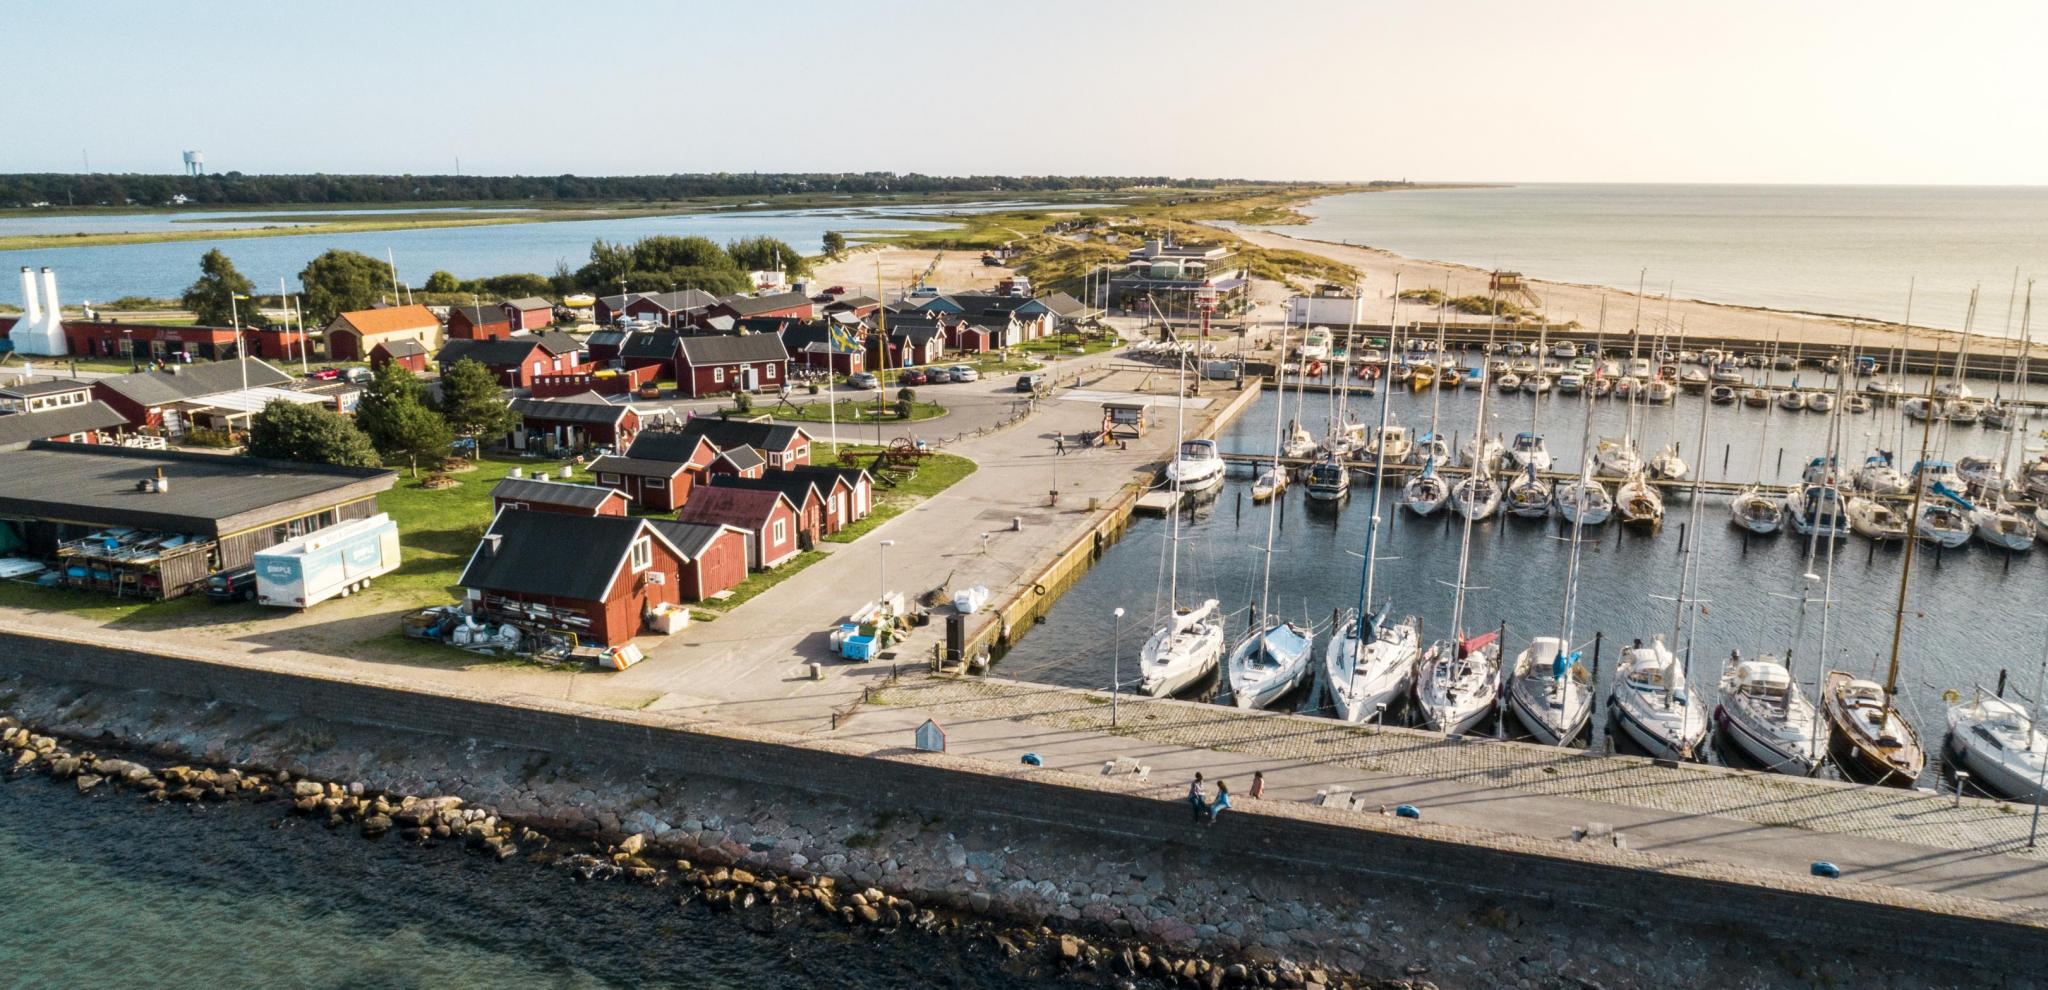 View from above of Skanör harbor with boats and small fishermans huts